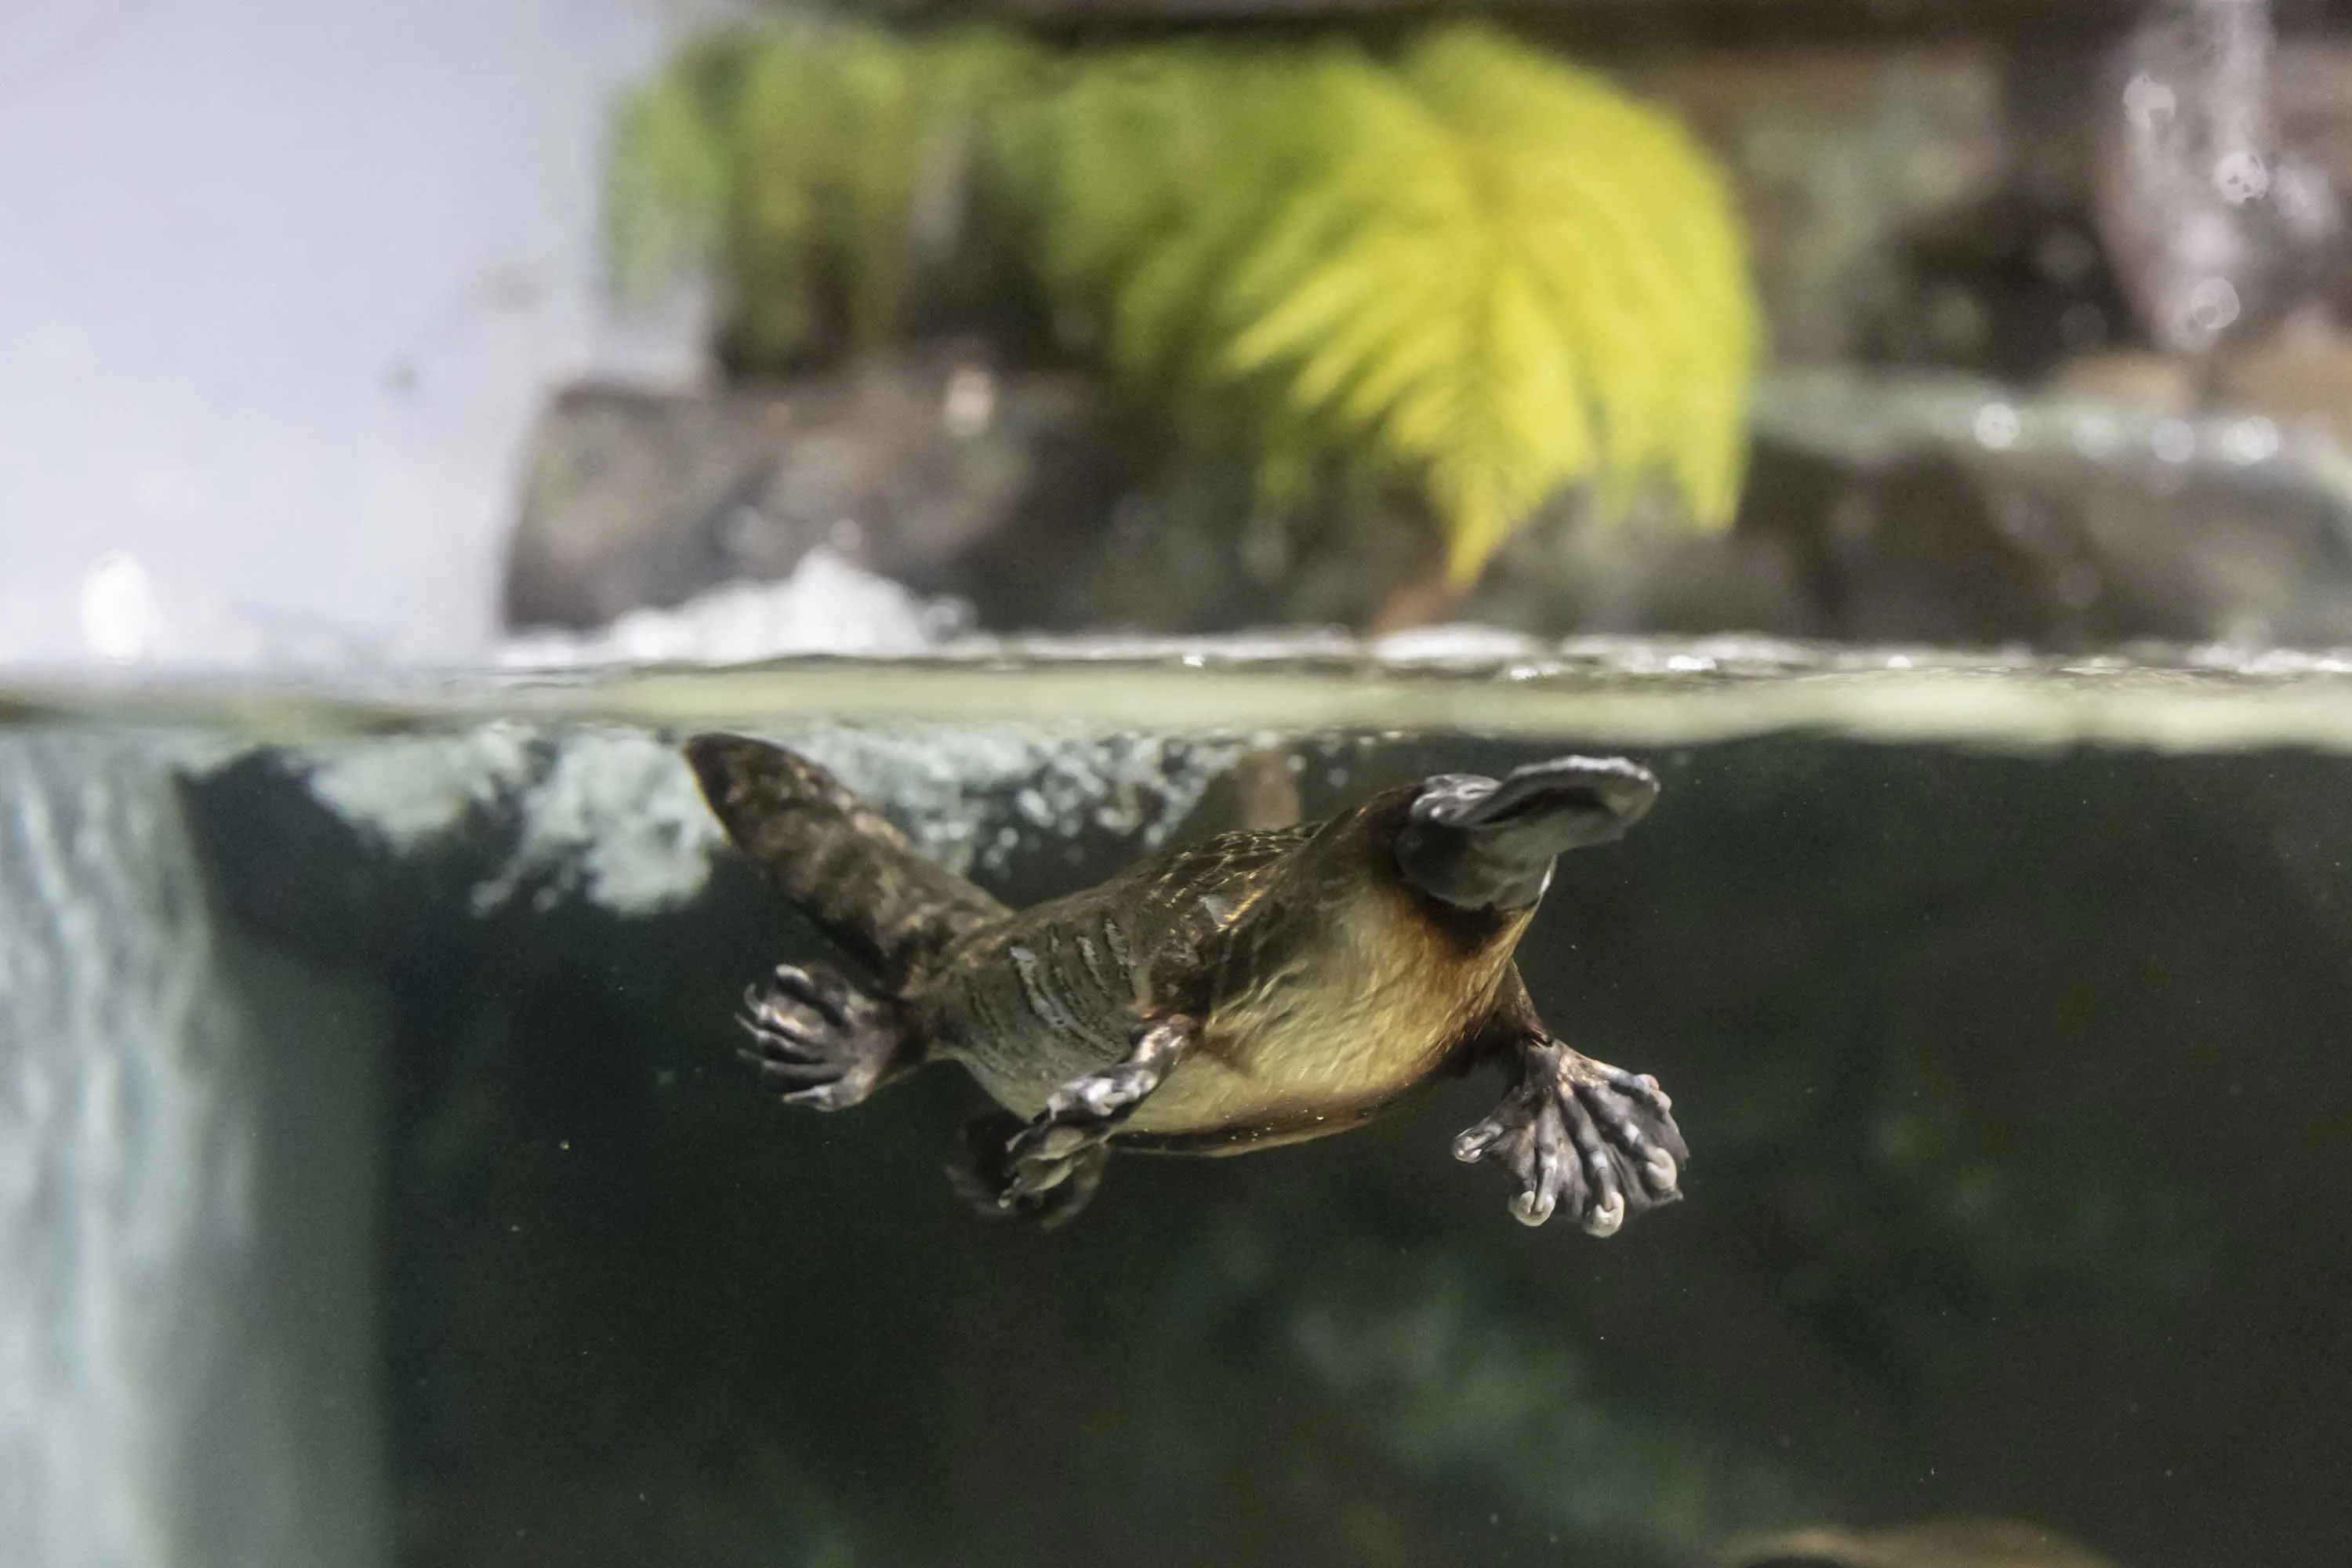 A platypus swims just below the surface of the water, seen through the side of an aquarium.